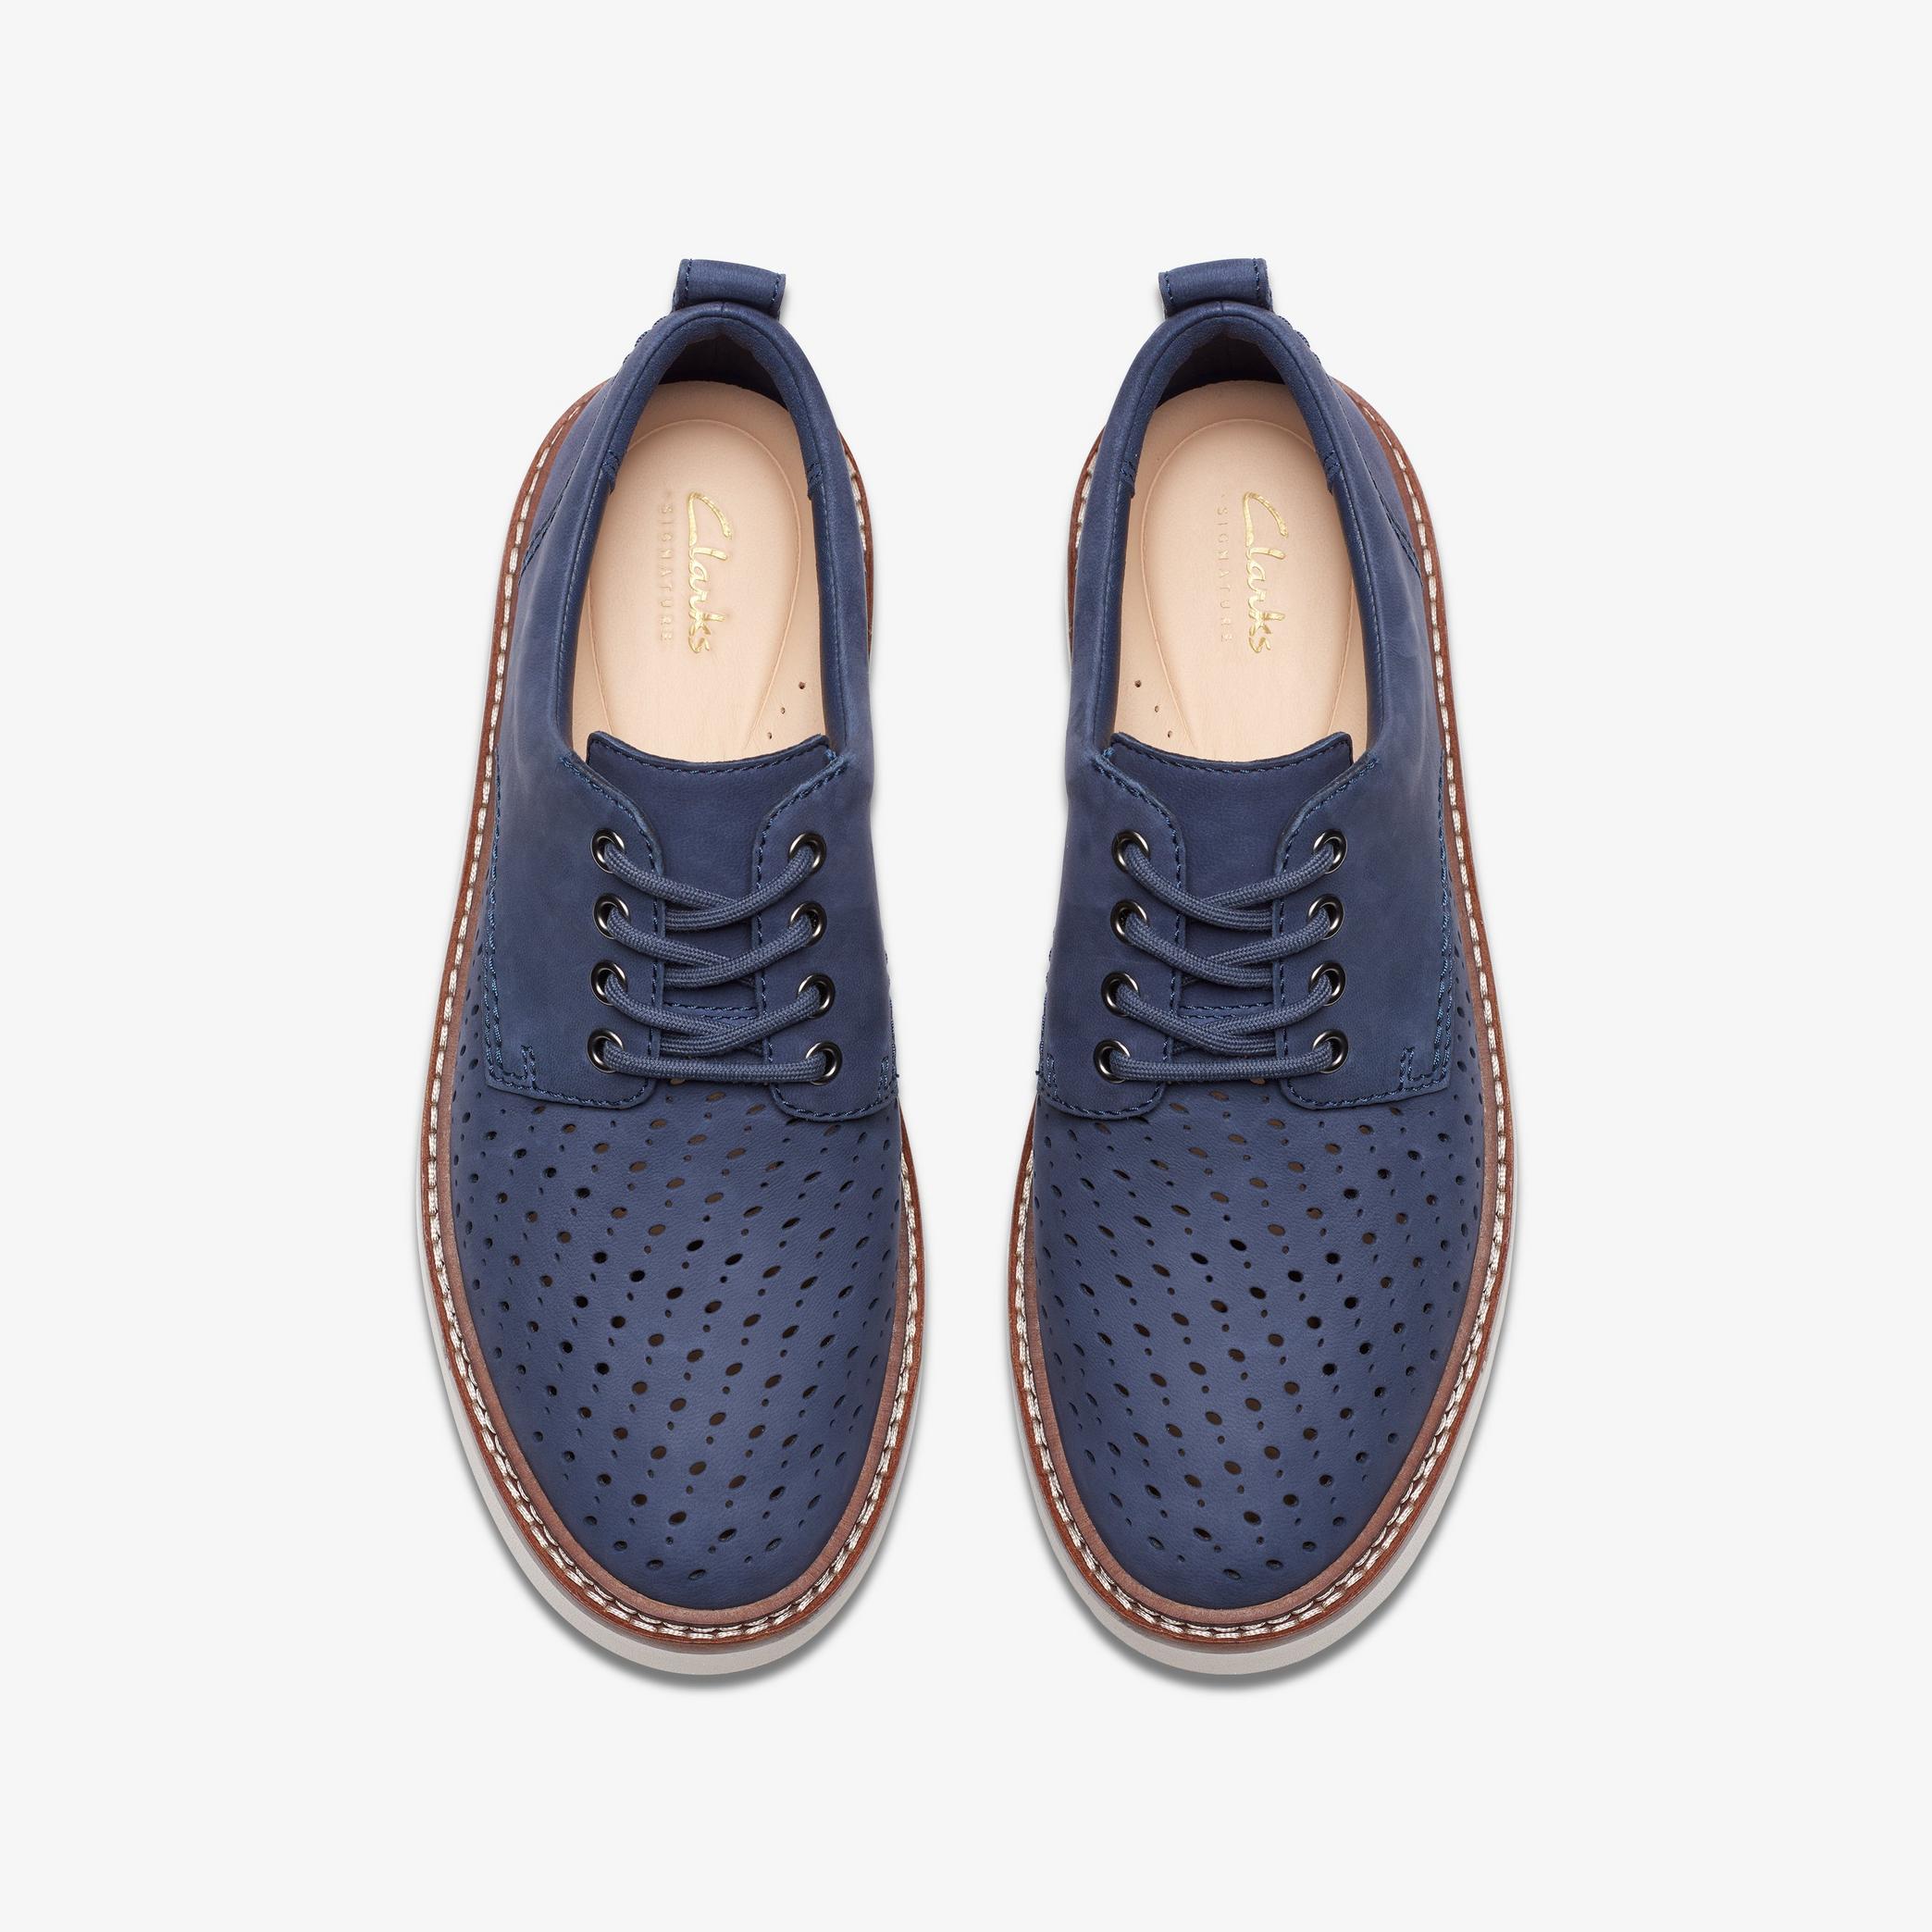 Orianna Move Navy Nubuck Loafers, view 6 of 6